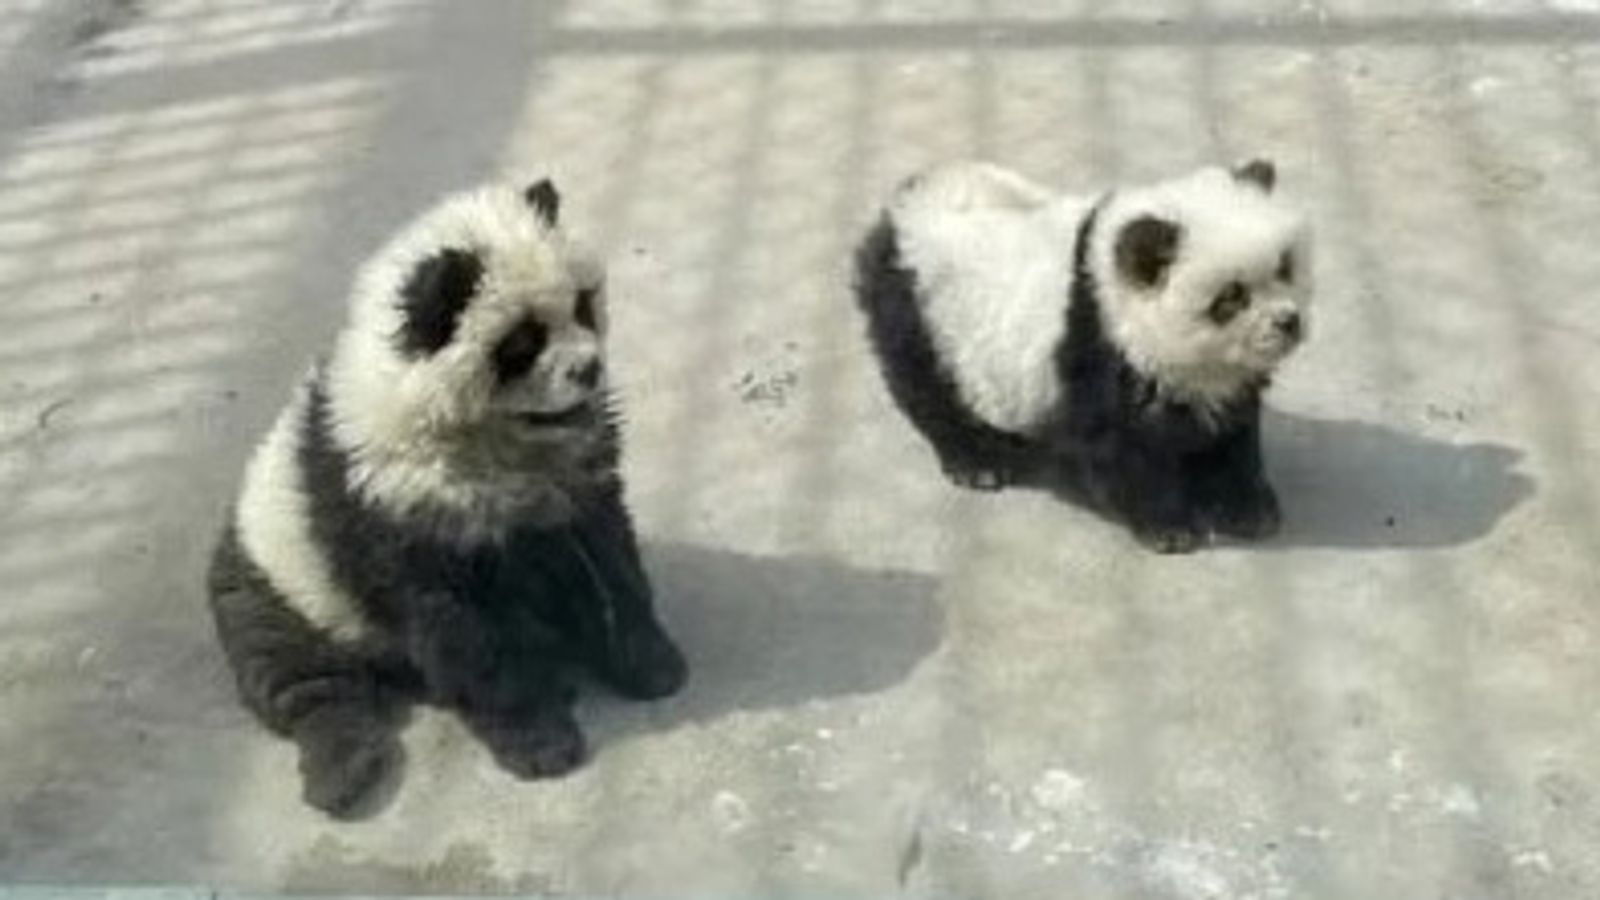 Chinese zoo under fire after dyeing dogs black and white for 'panda' exhibit